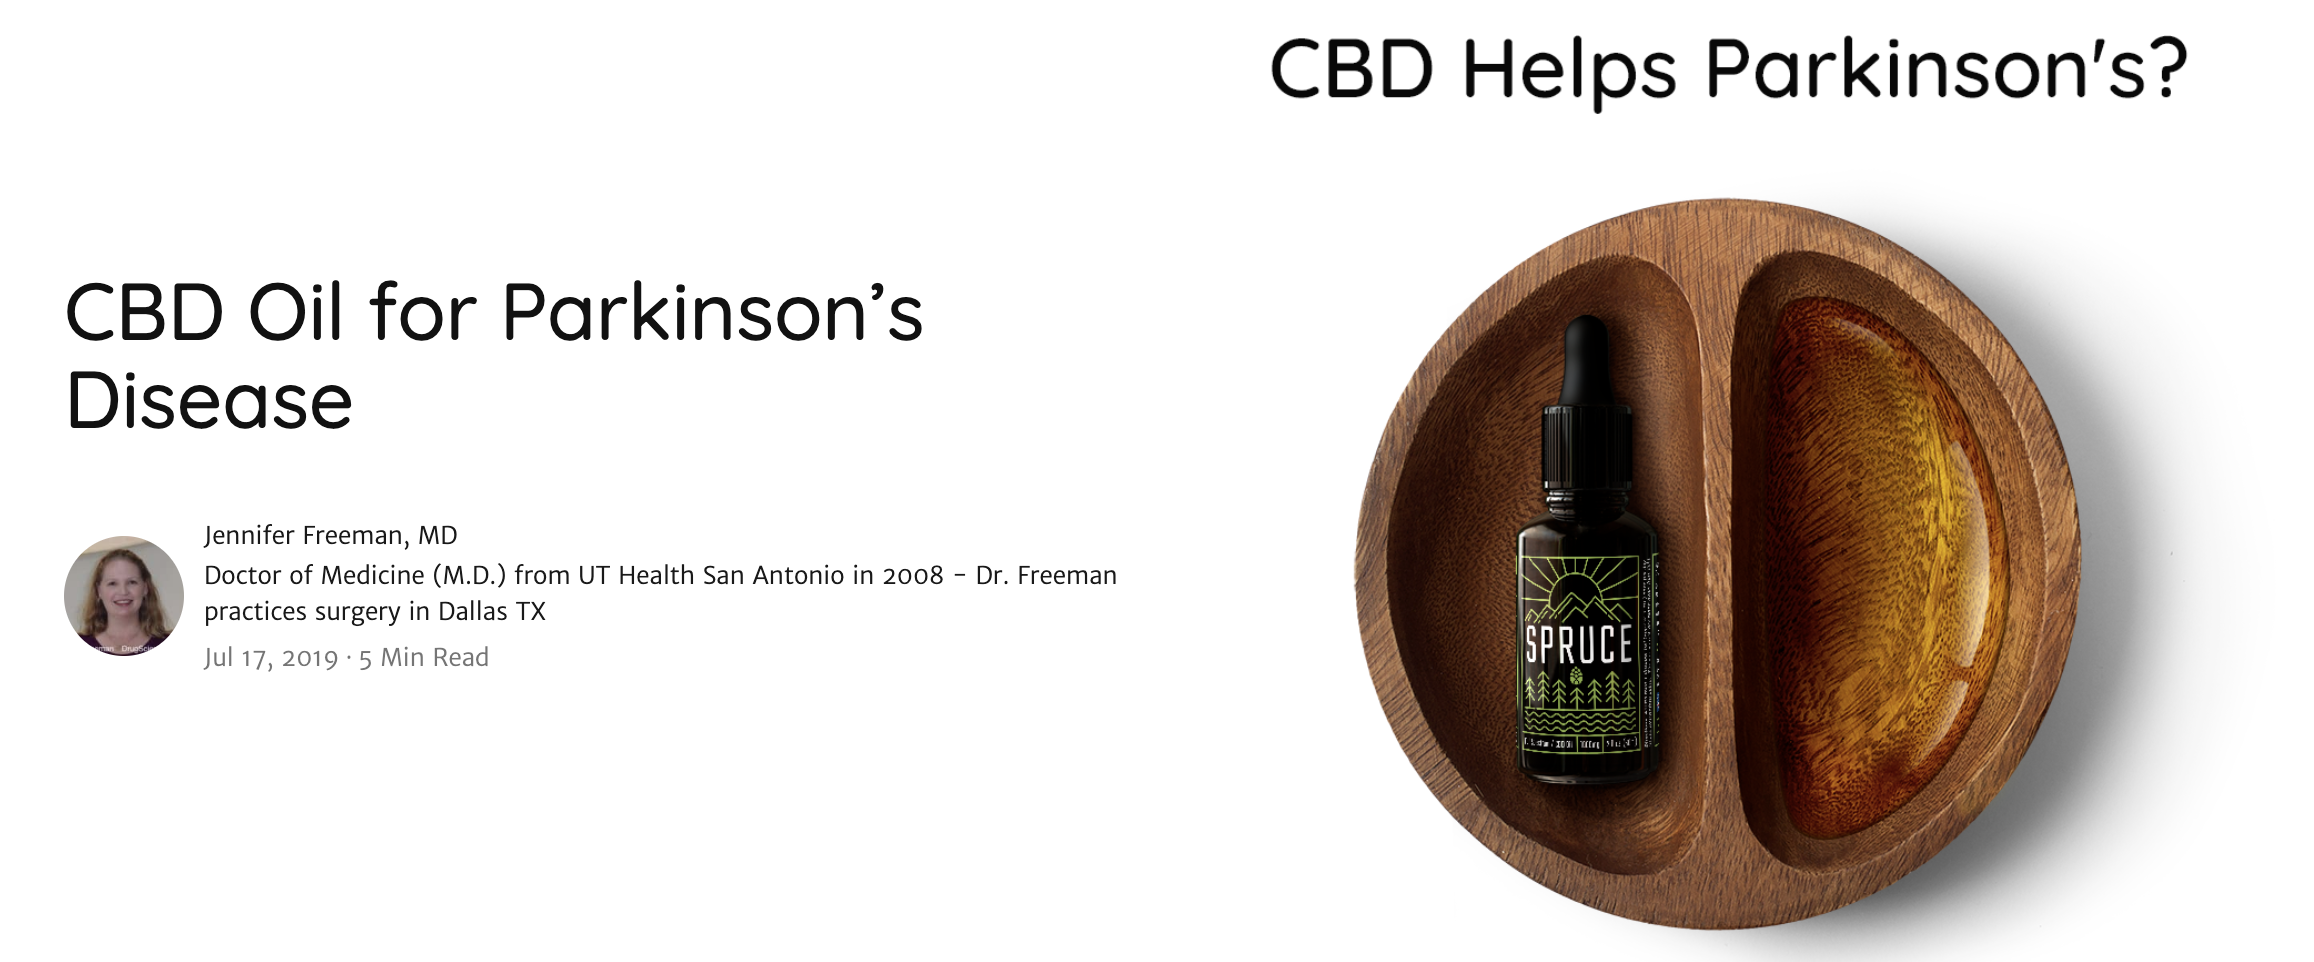 Parkinson's Disease  and Cannabidiol - the US and UK Perspective featured image